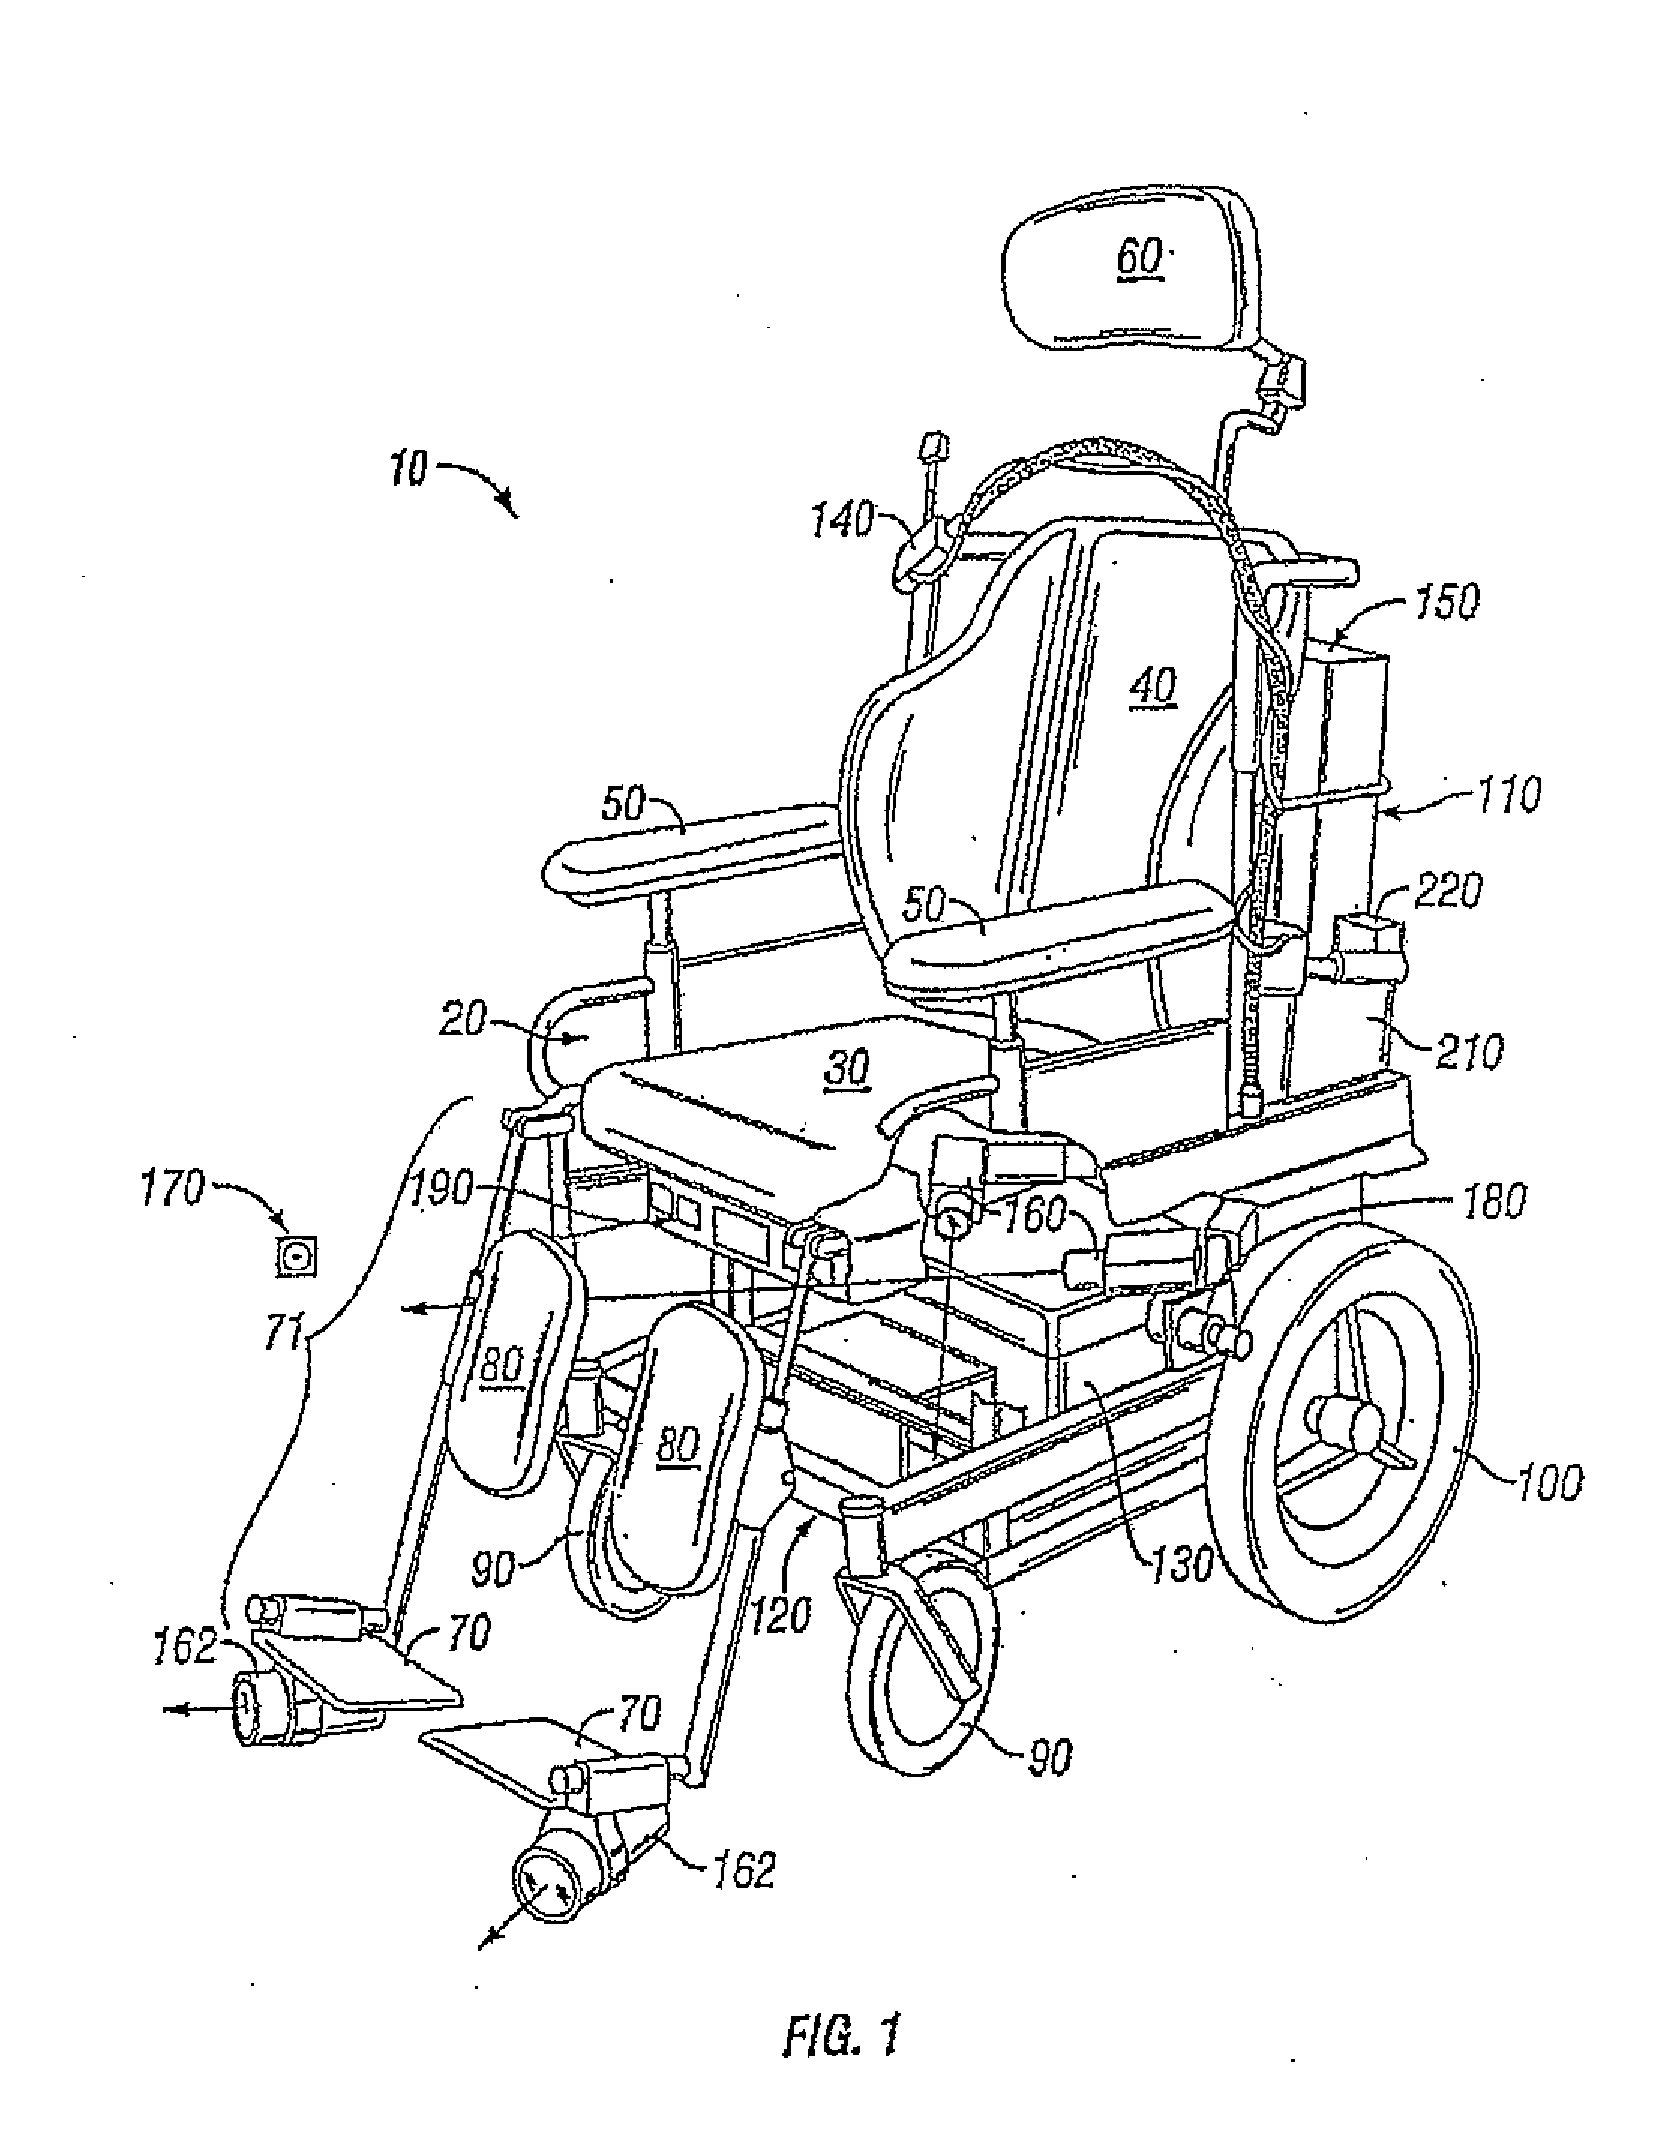 Computer-controlled power wheelchair navigation system